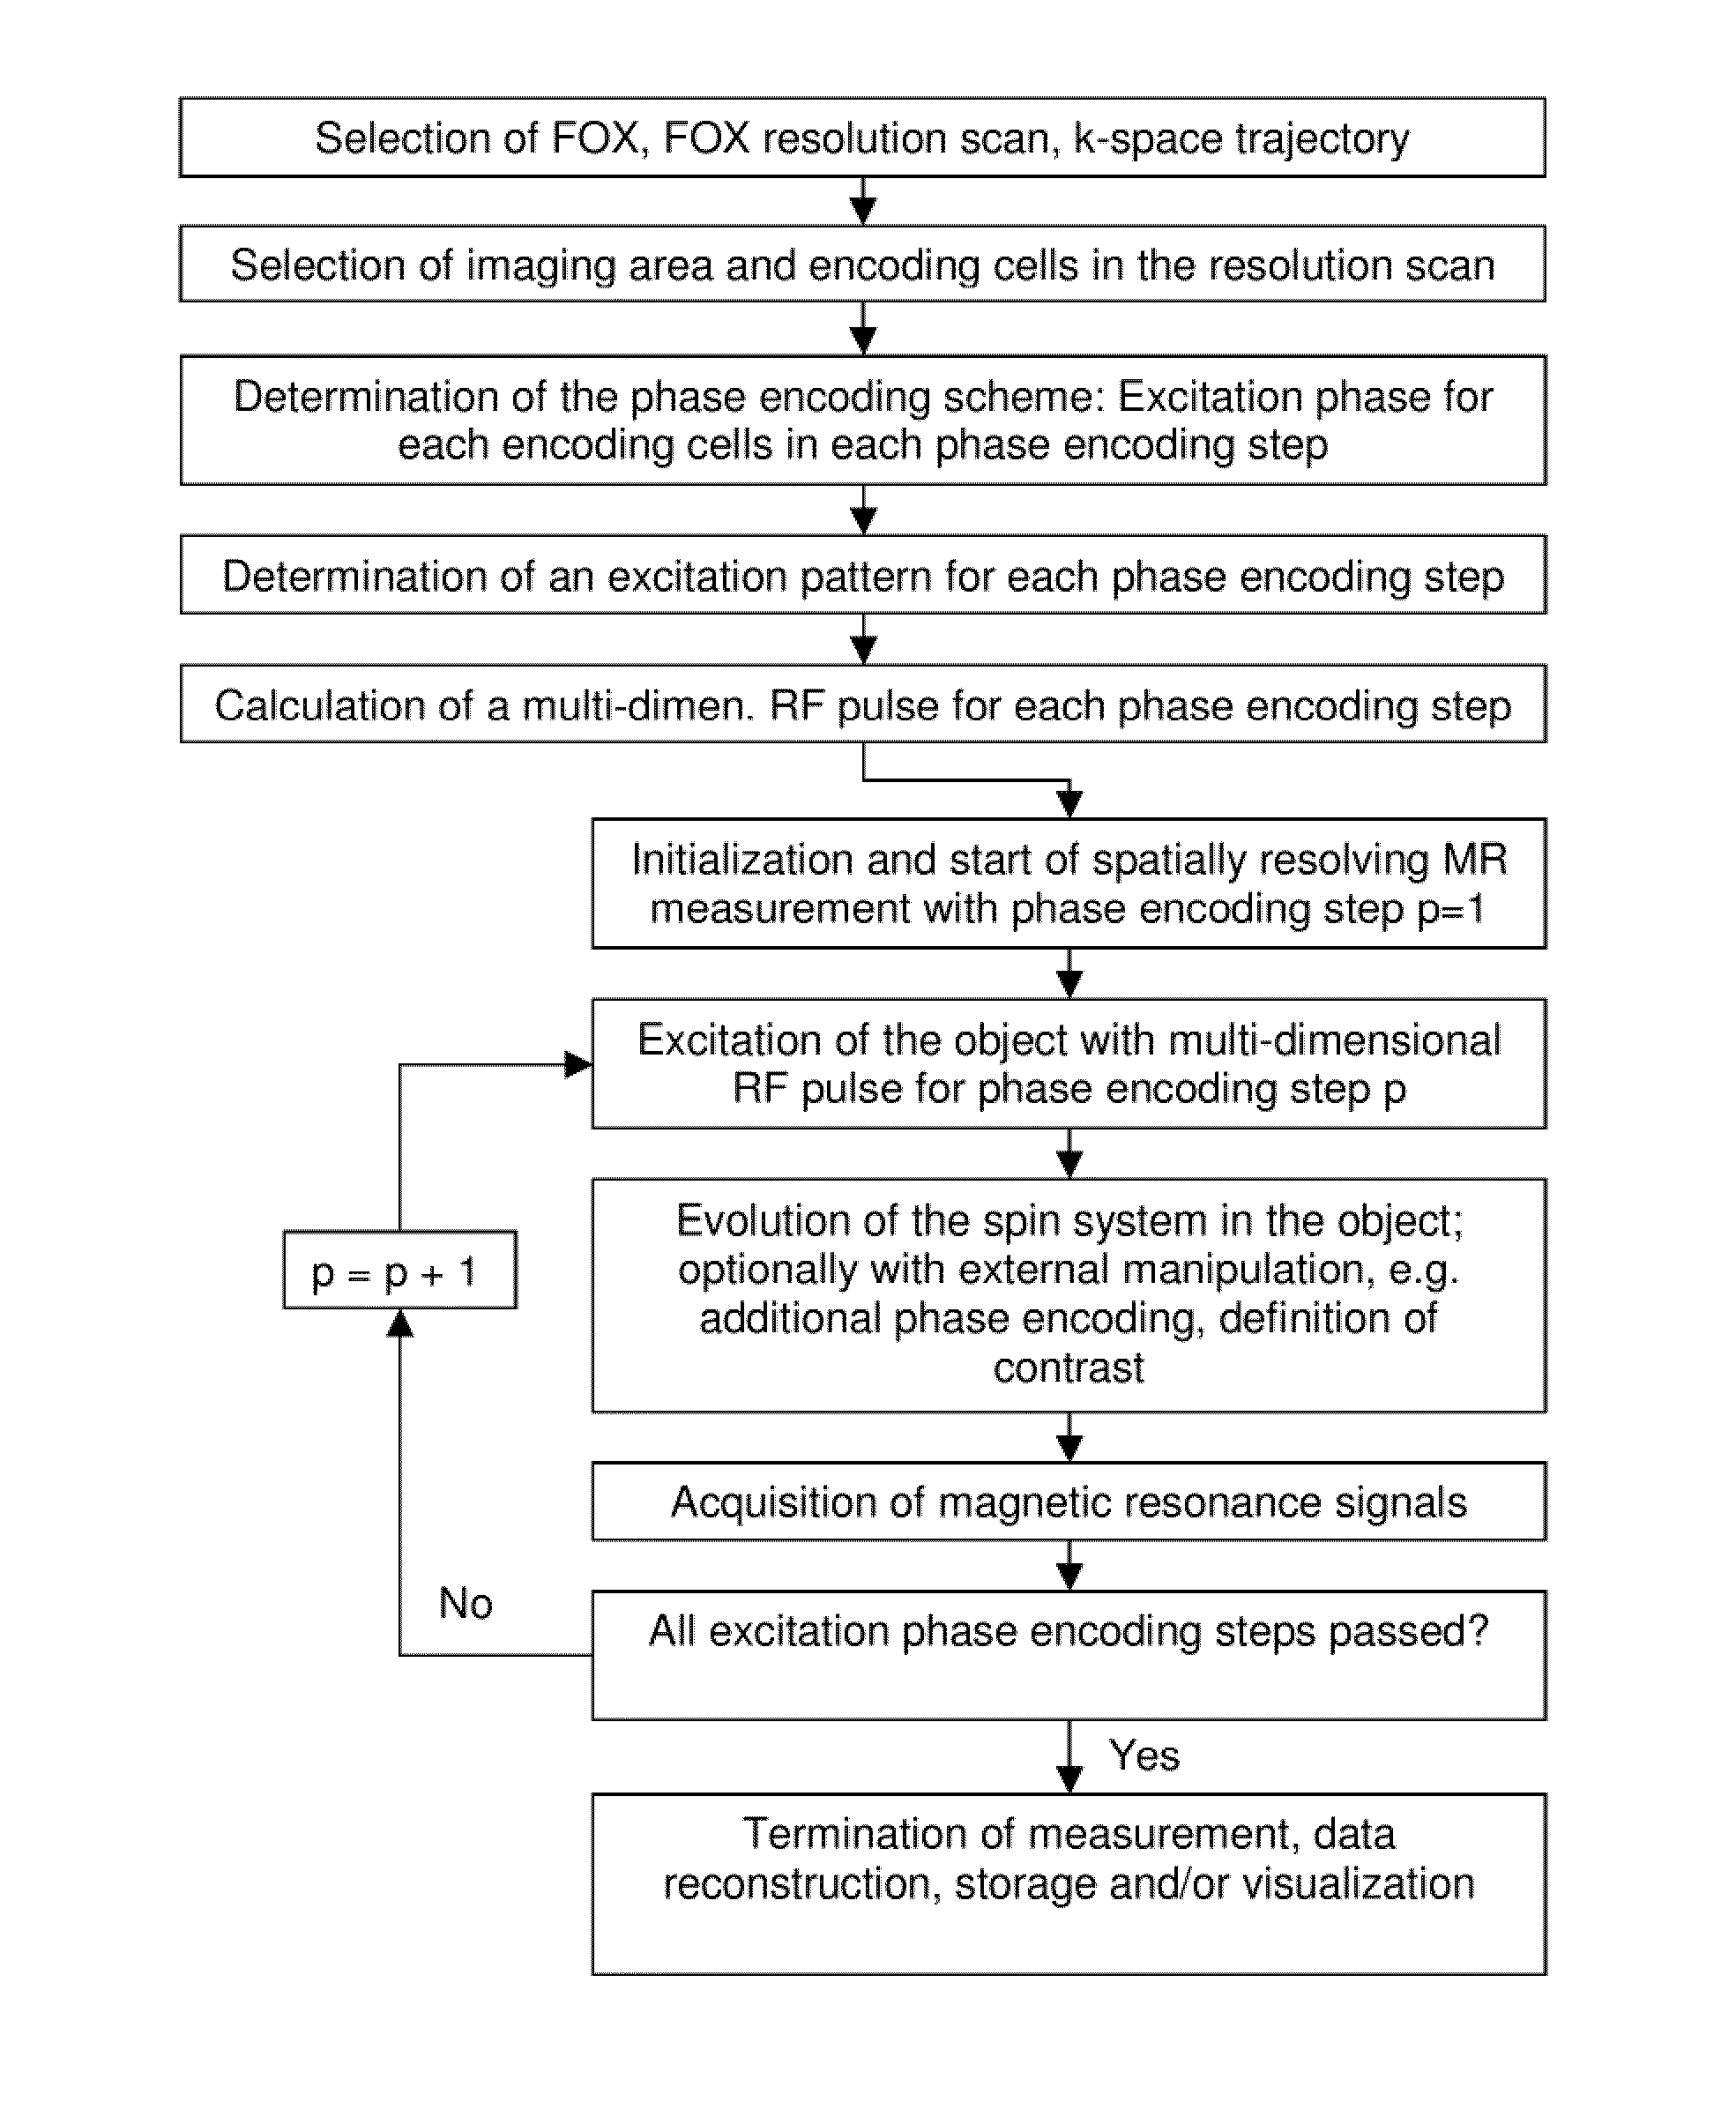 Method for determining the spatial distribution of magnetic resonance signals through multi-dimensional RF excitation pulses